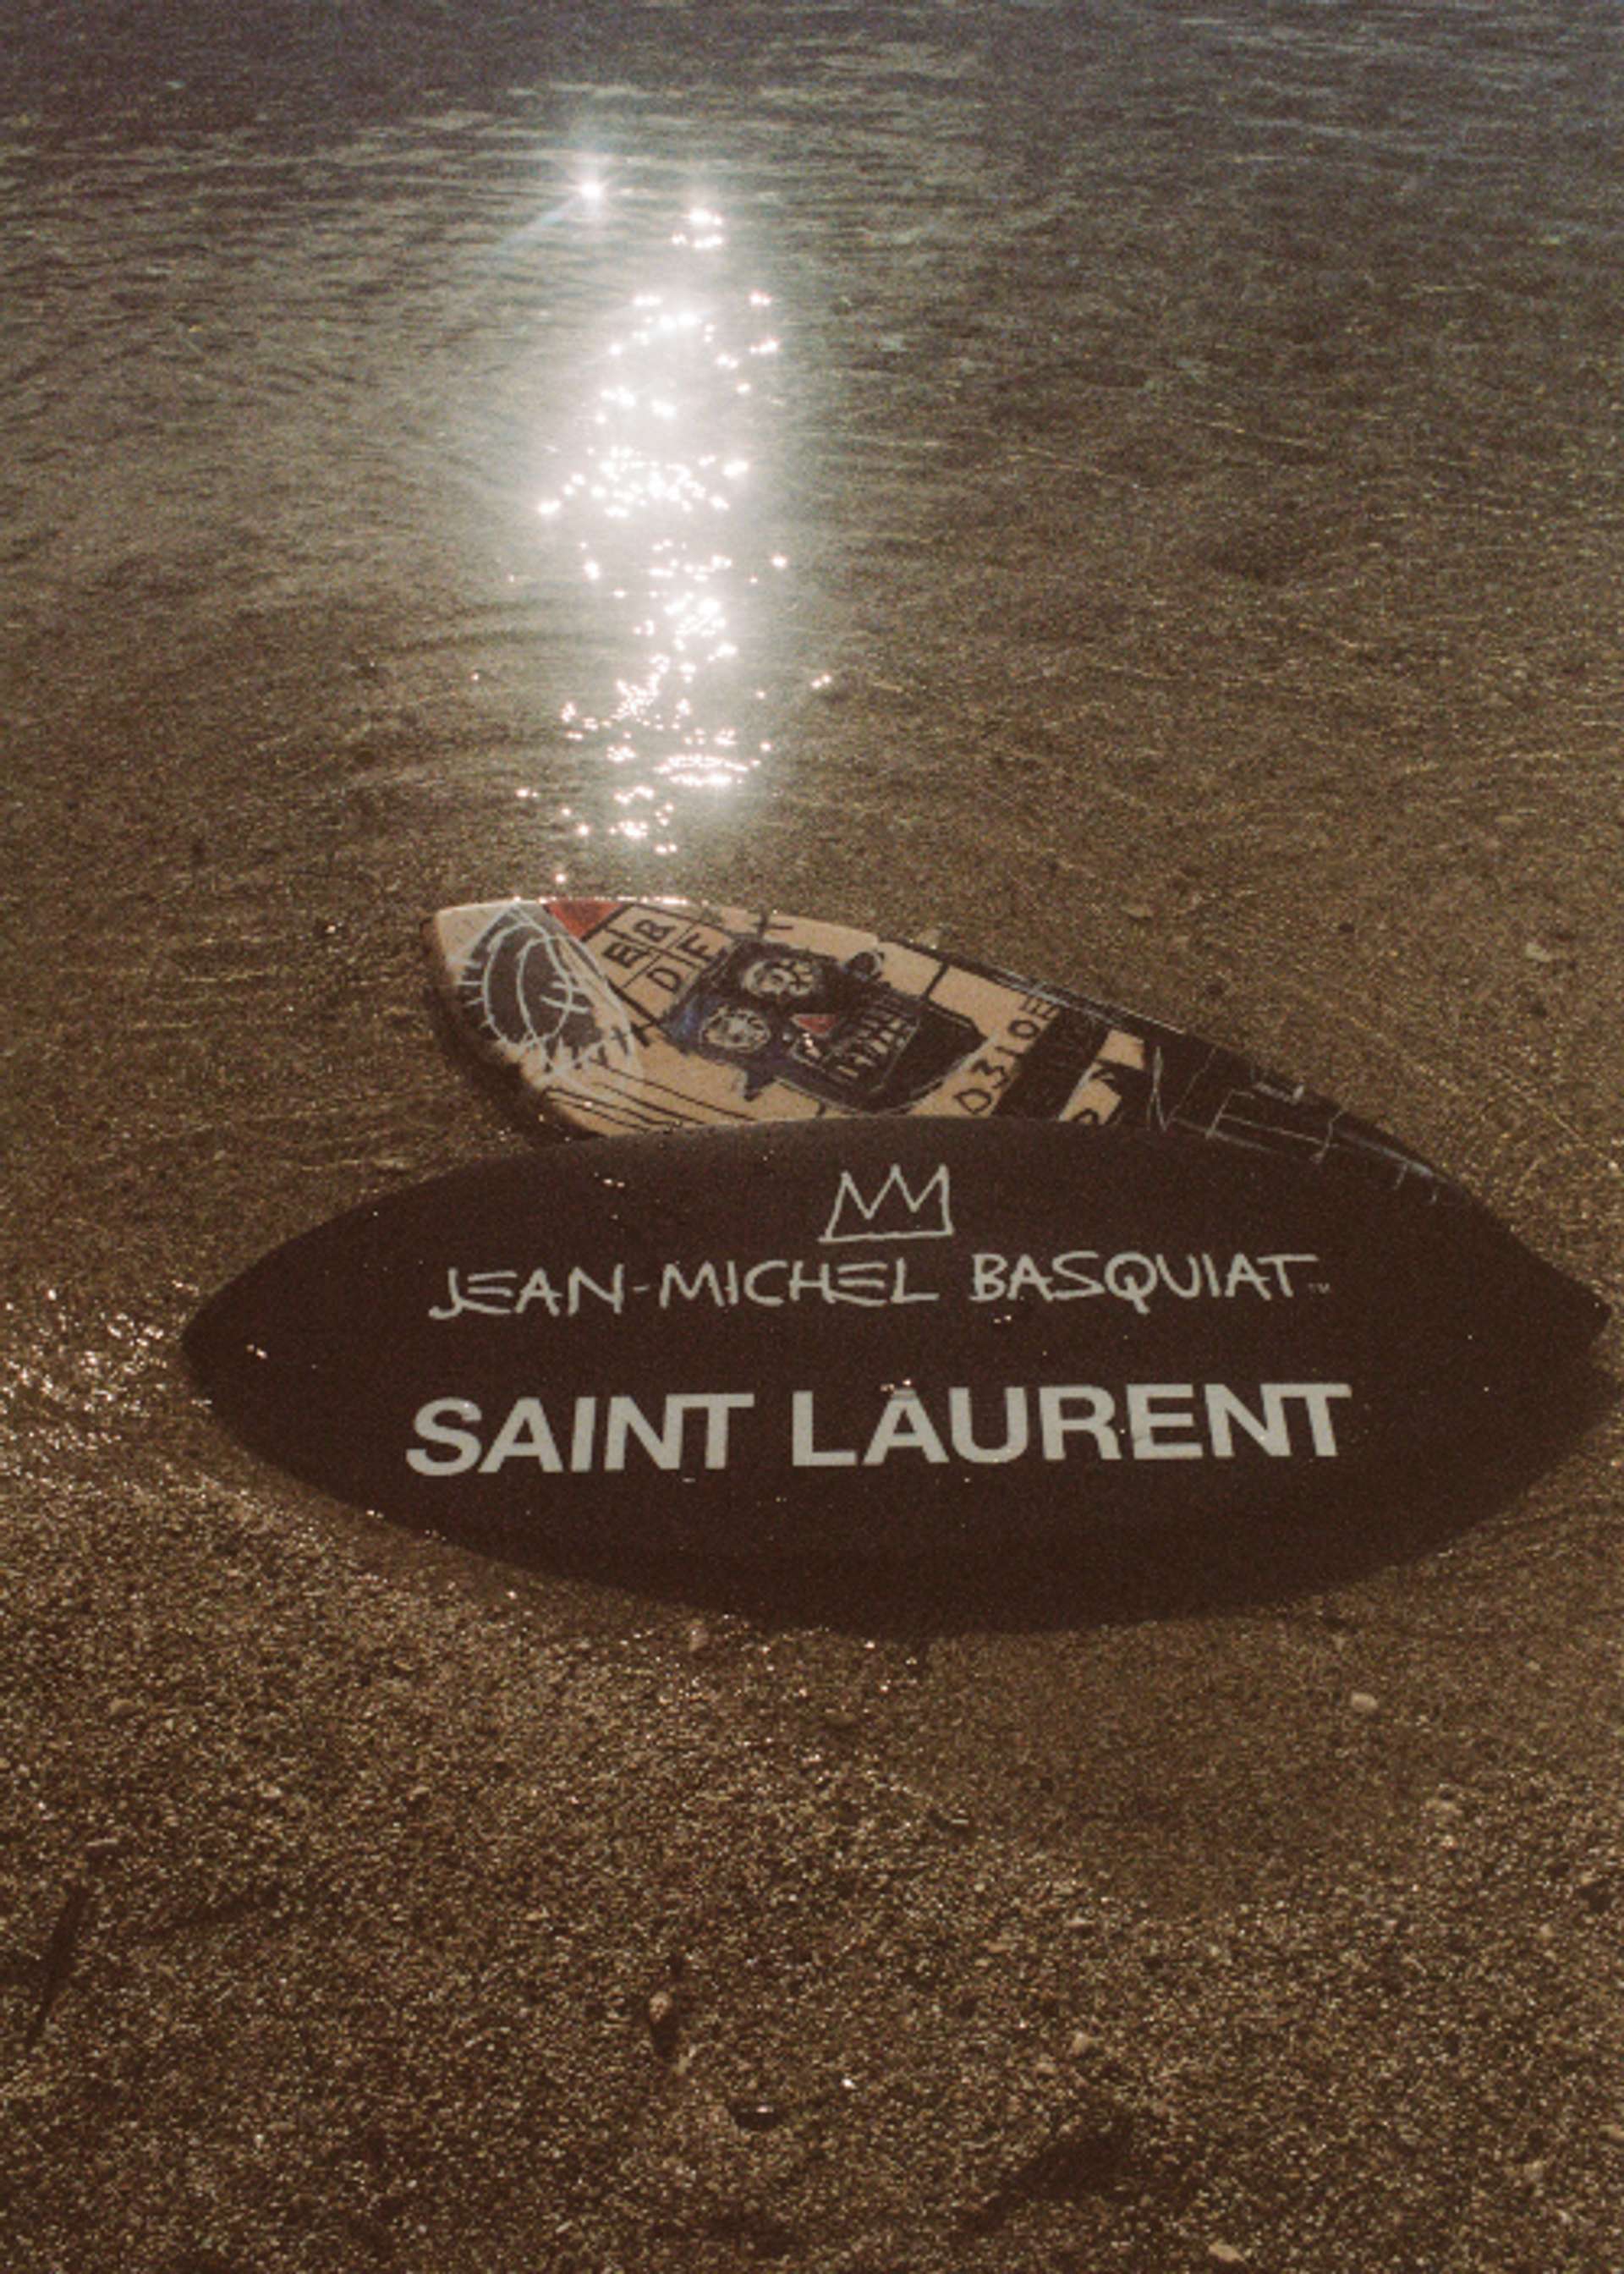 An image of two skimboards lying on the sand, each showing one side of the item. The top features an artwork by Basquiat, while the bottom of the board has the artist’s name topped by a crown and the Saint Laurent logo.